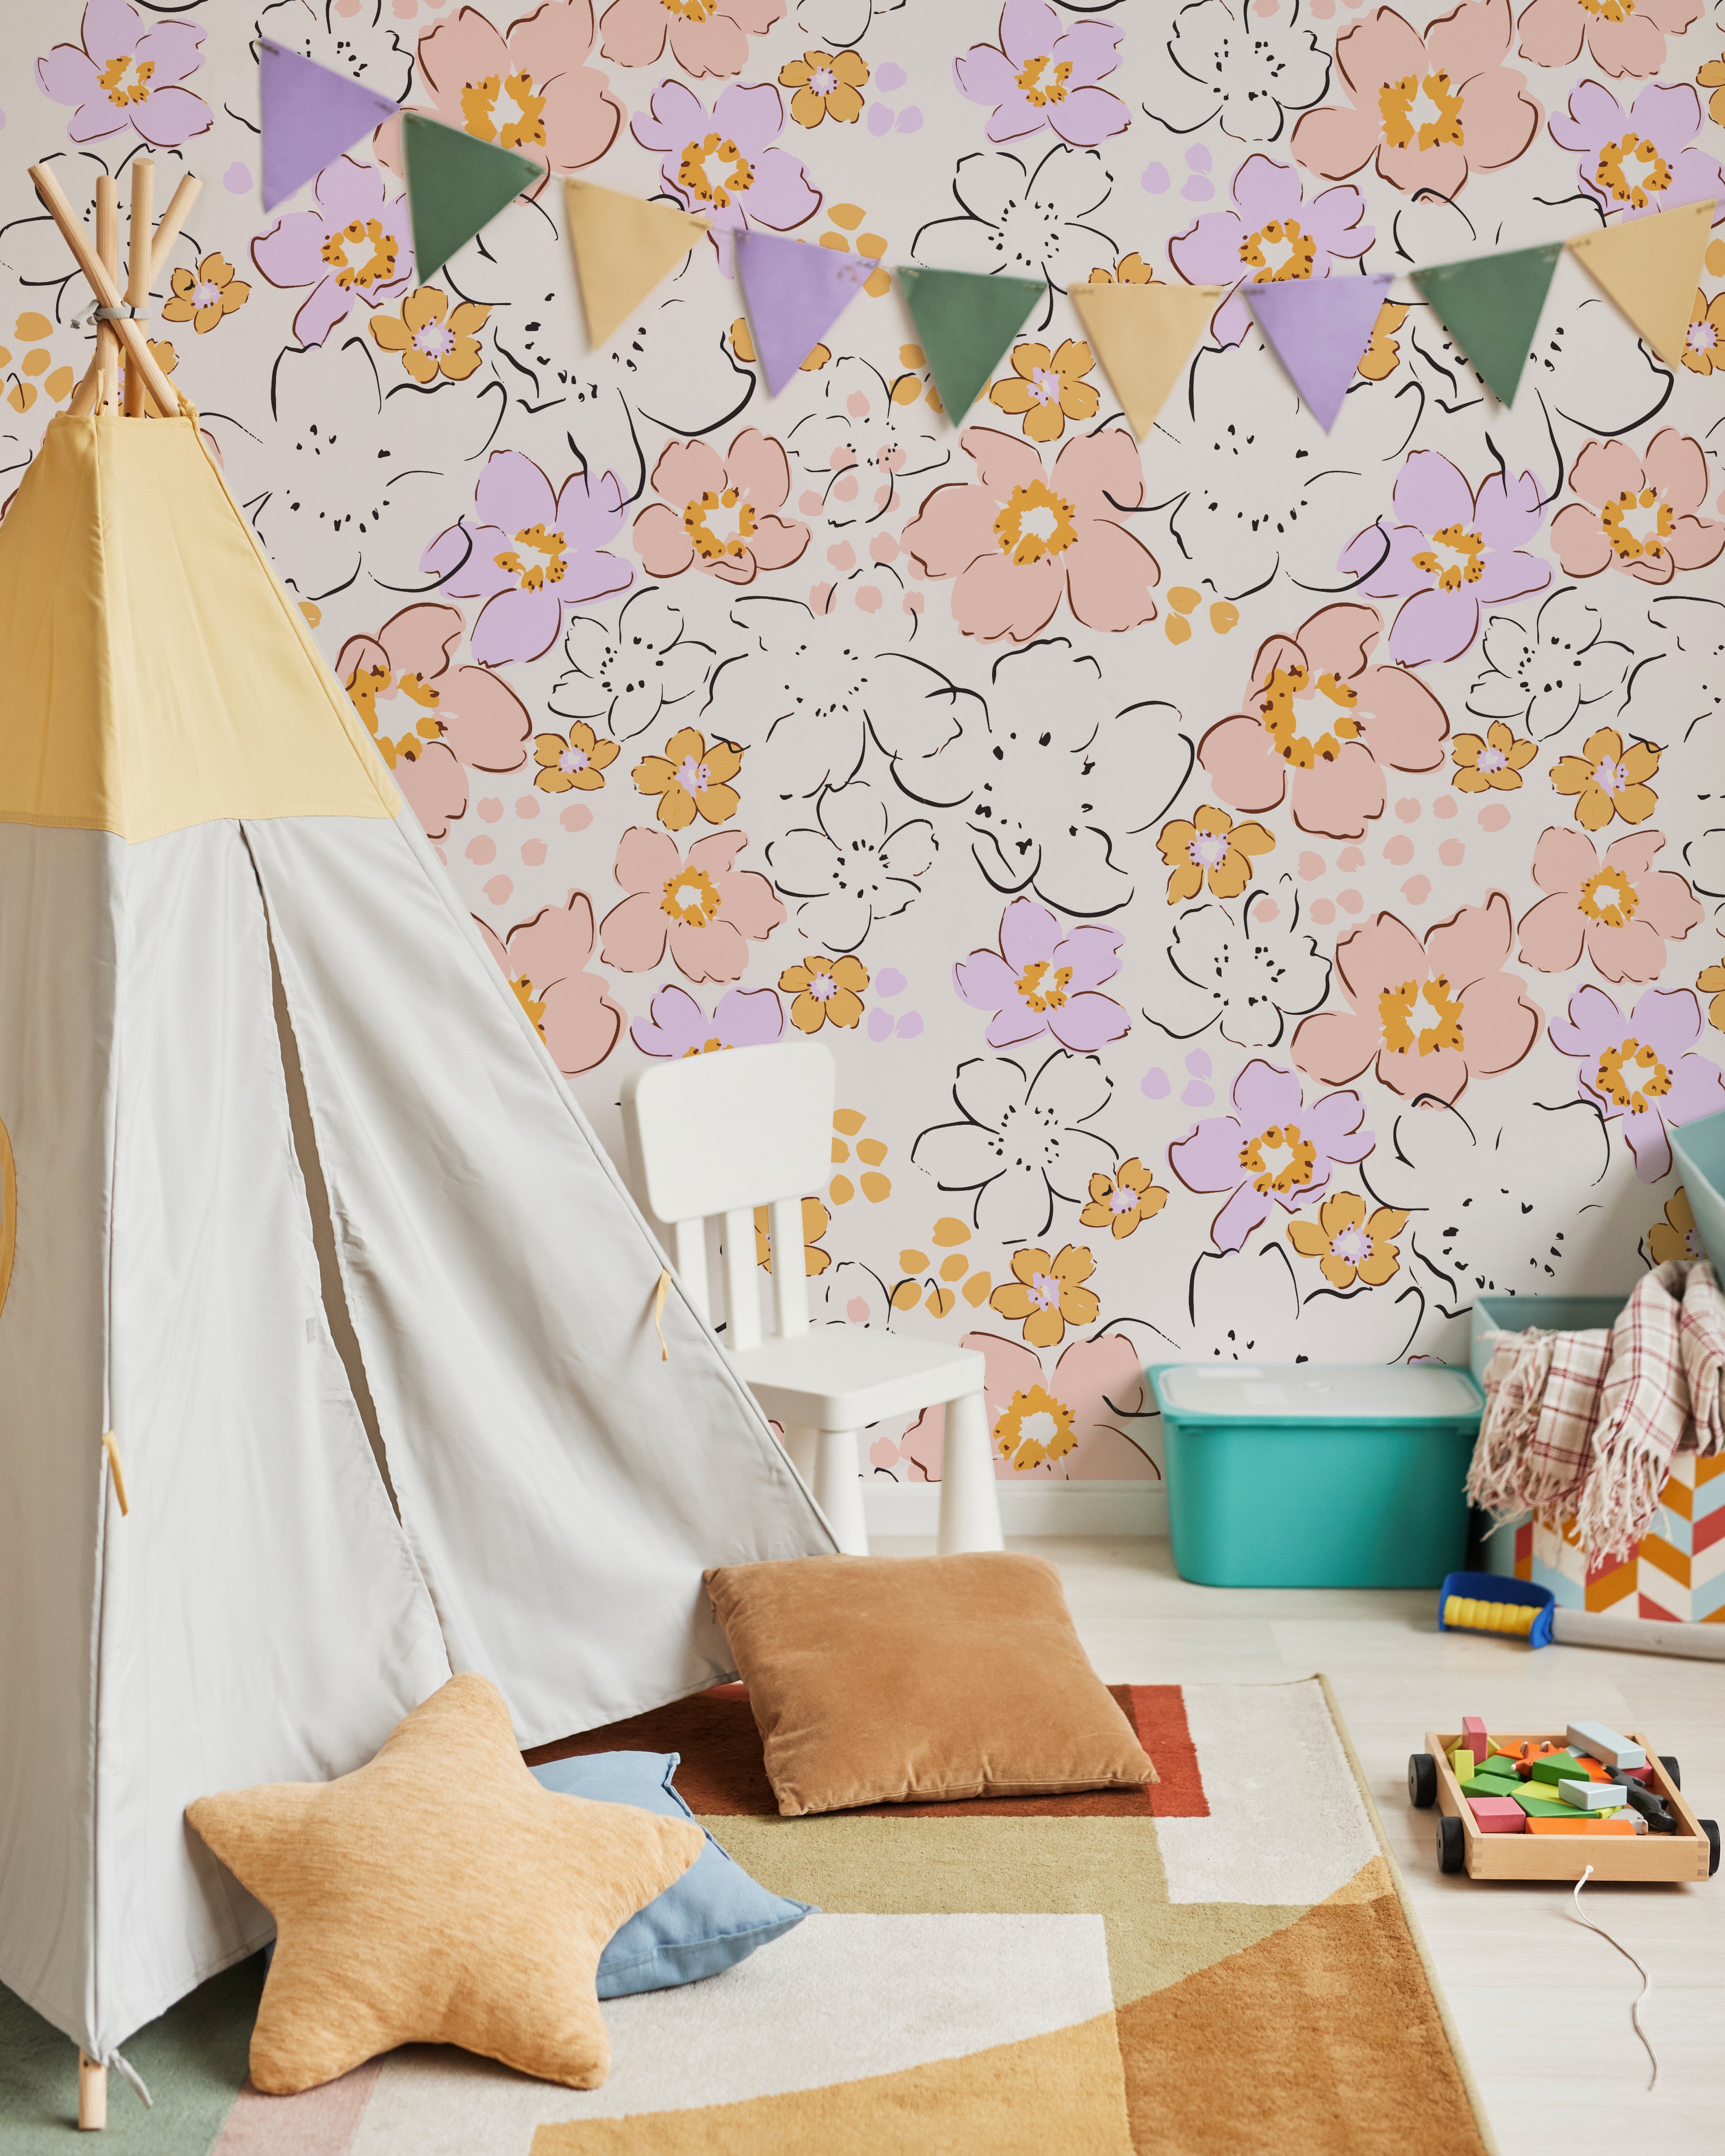 A vibrant and playful children's play area with a wall adorned by the Ditsy Garden Wallpaper, featuring a cheerful pattern of white, pink, and yellow flowers on a soft pastel background. The scene includes a white teepee, colorful hanging pennants, and a variety of toys and cushions, creating a joyful and inviting space.